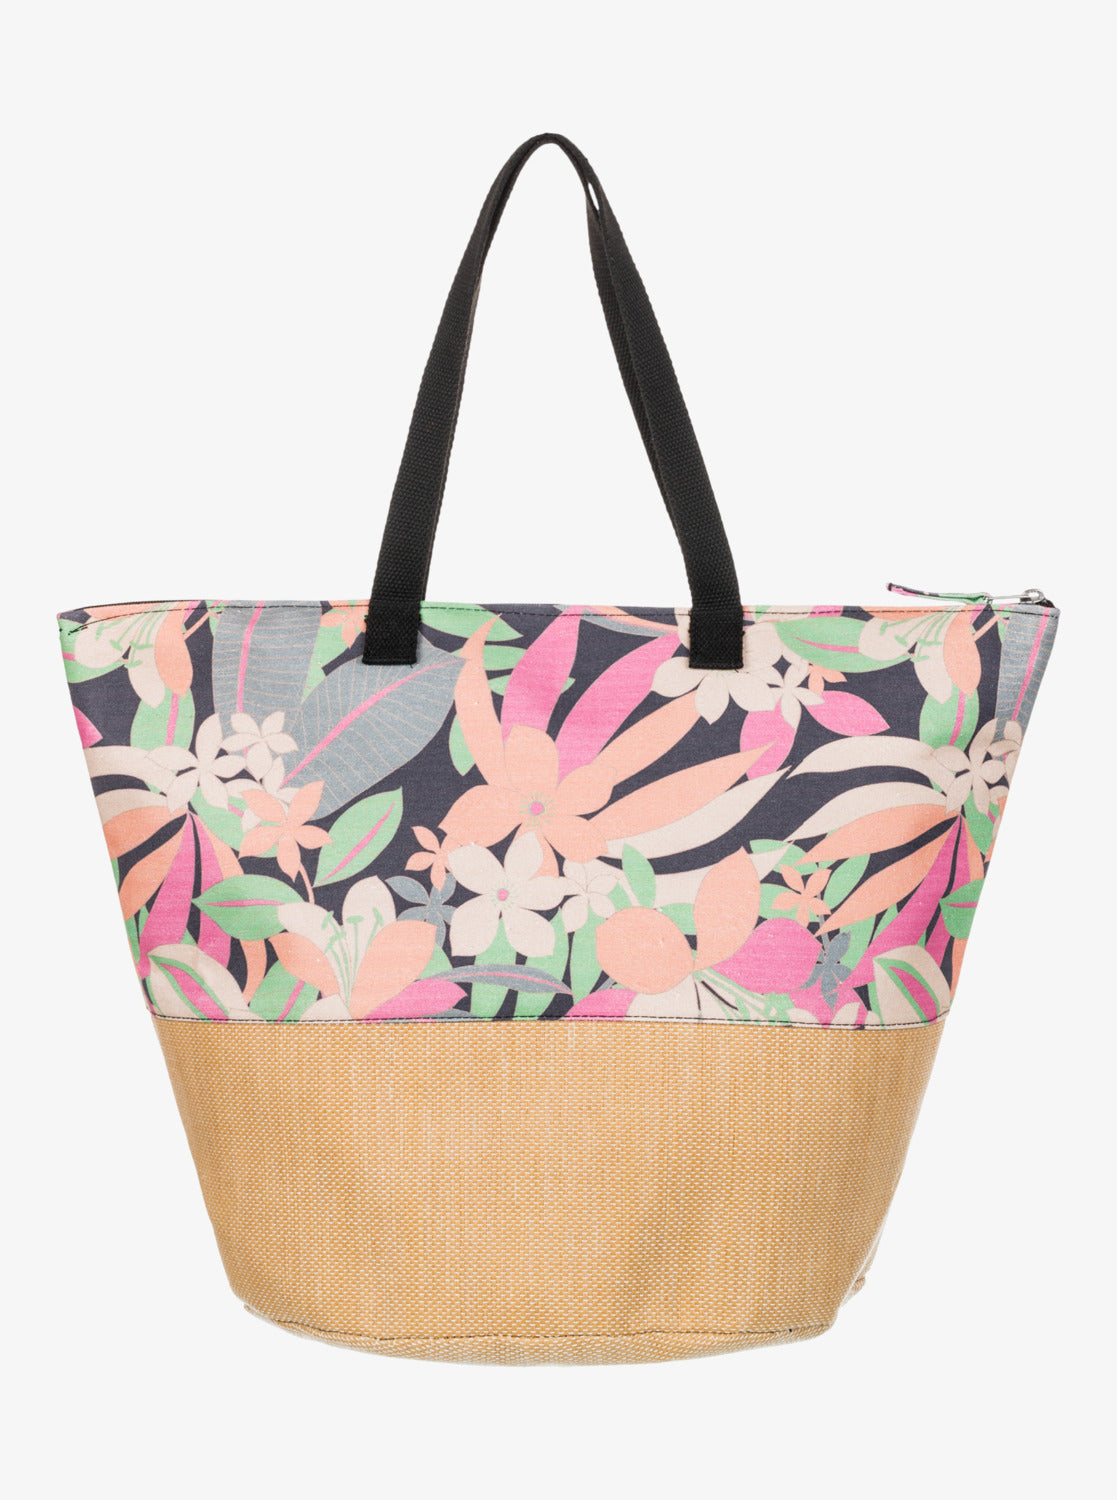 Roxy Waikiki Life Tote Bag in Anthracite Palm Song